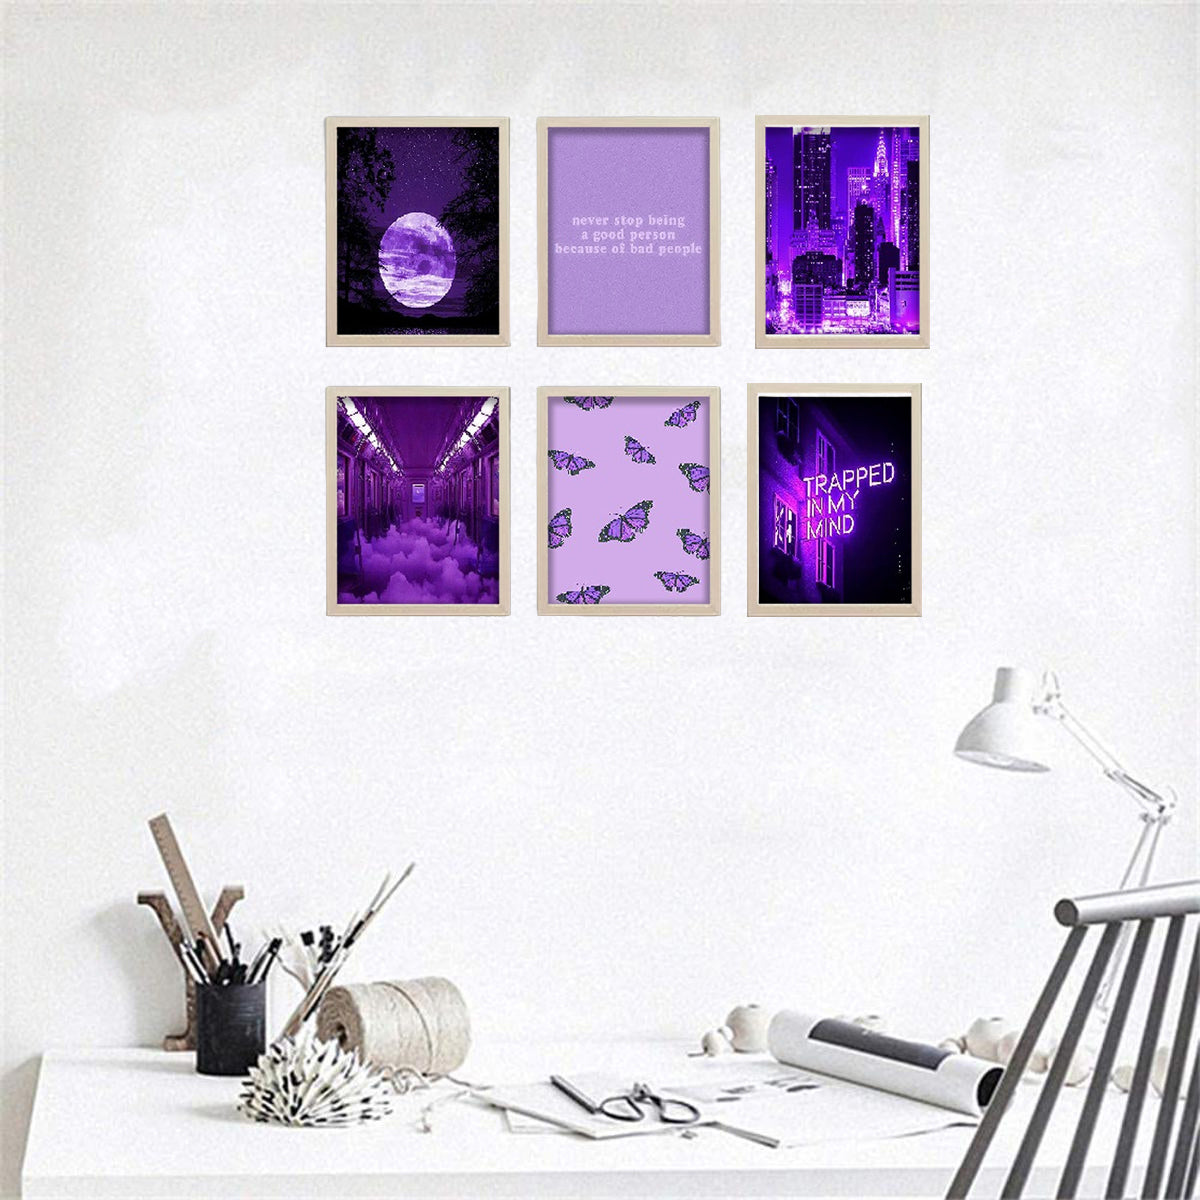 6 Pack Inspirational Quote Frames - 0